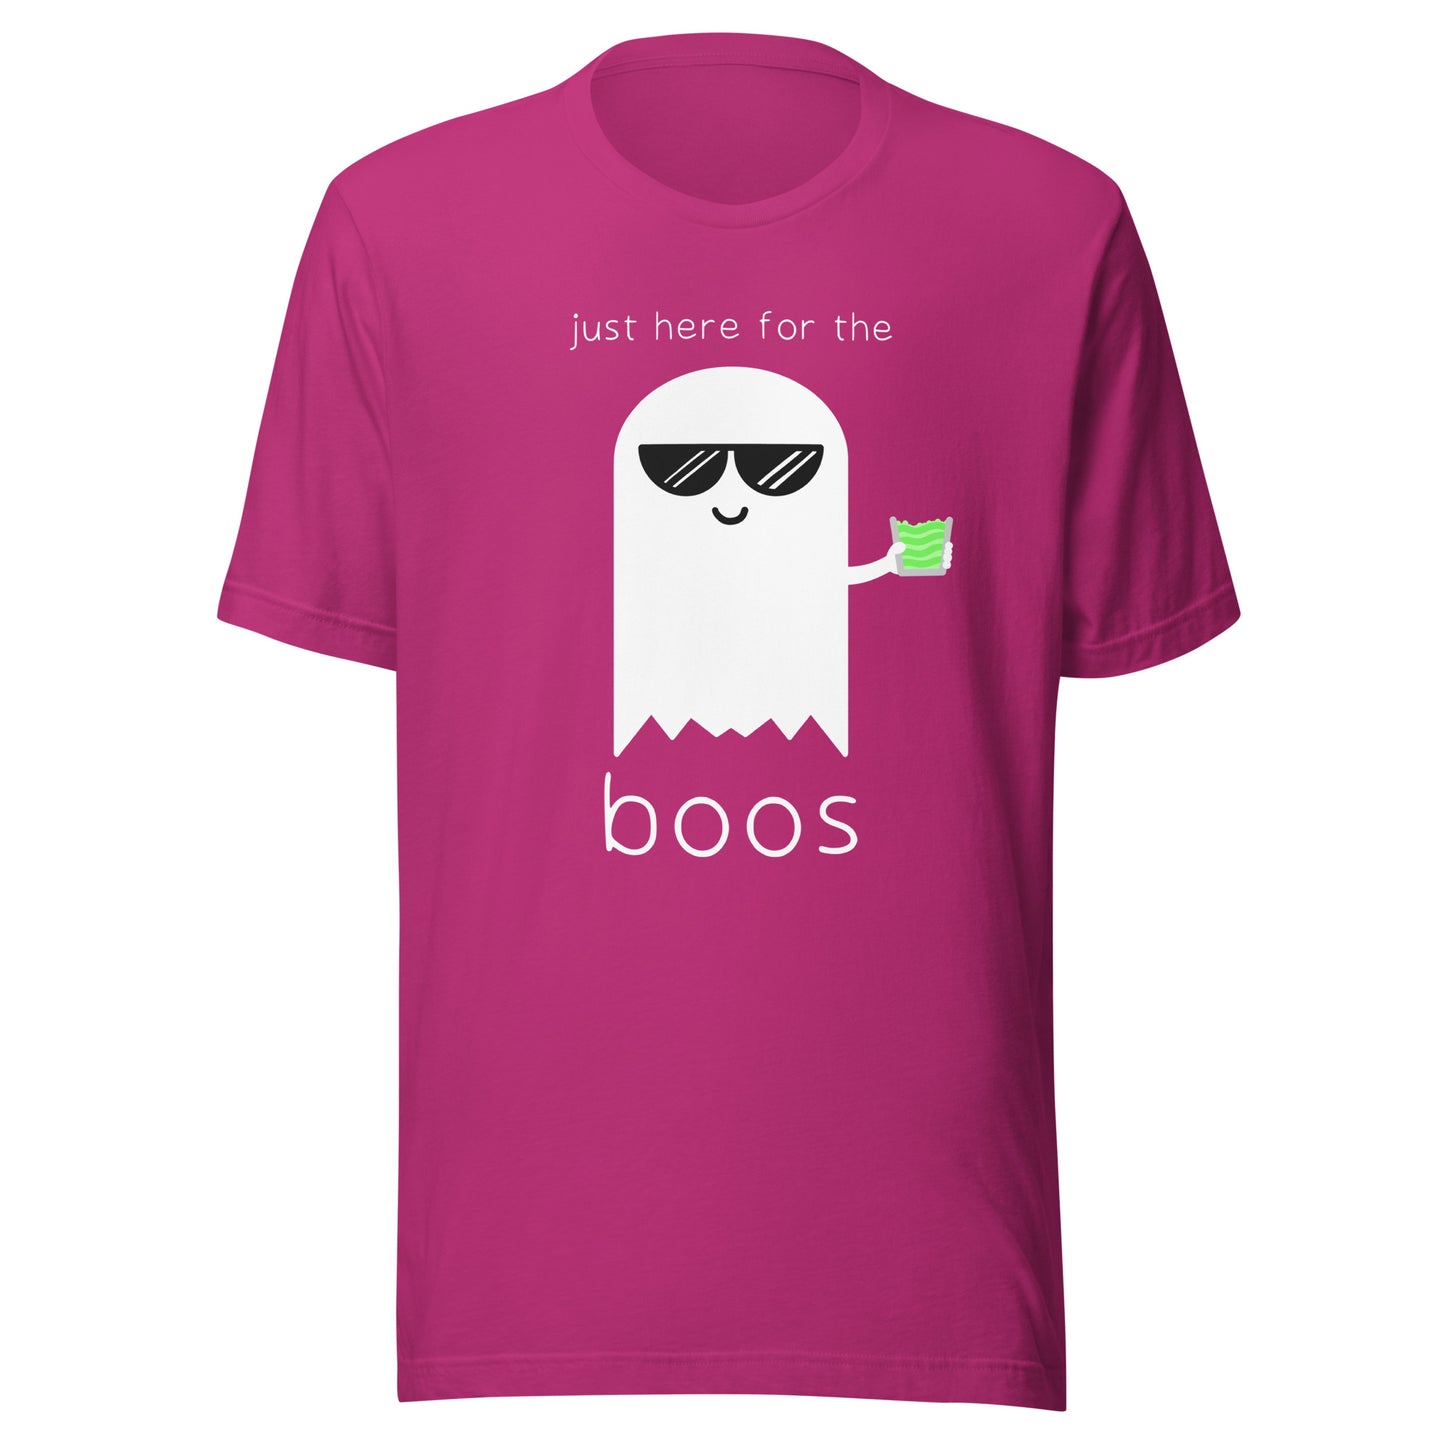 “Here for the Boos” Unisex t-shirt